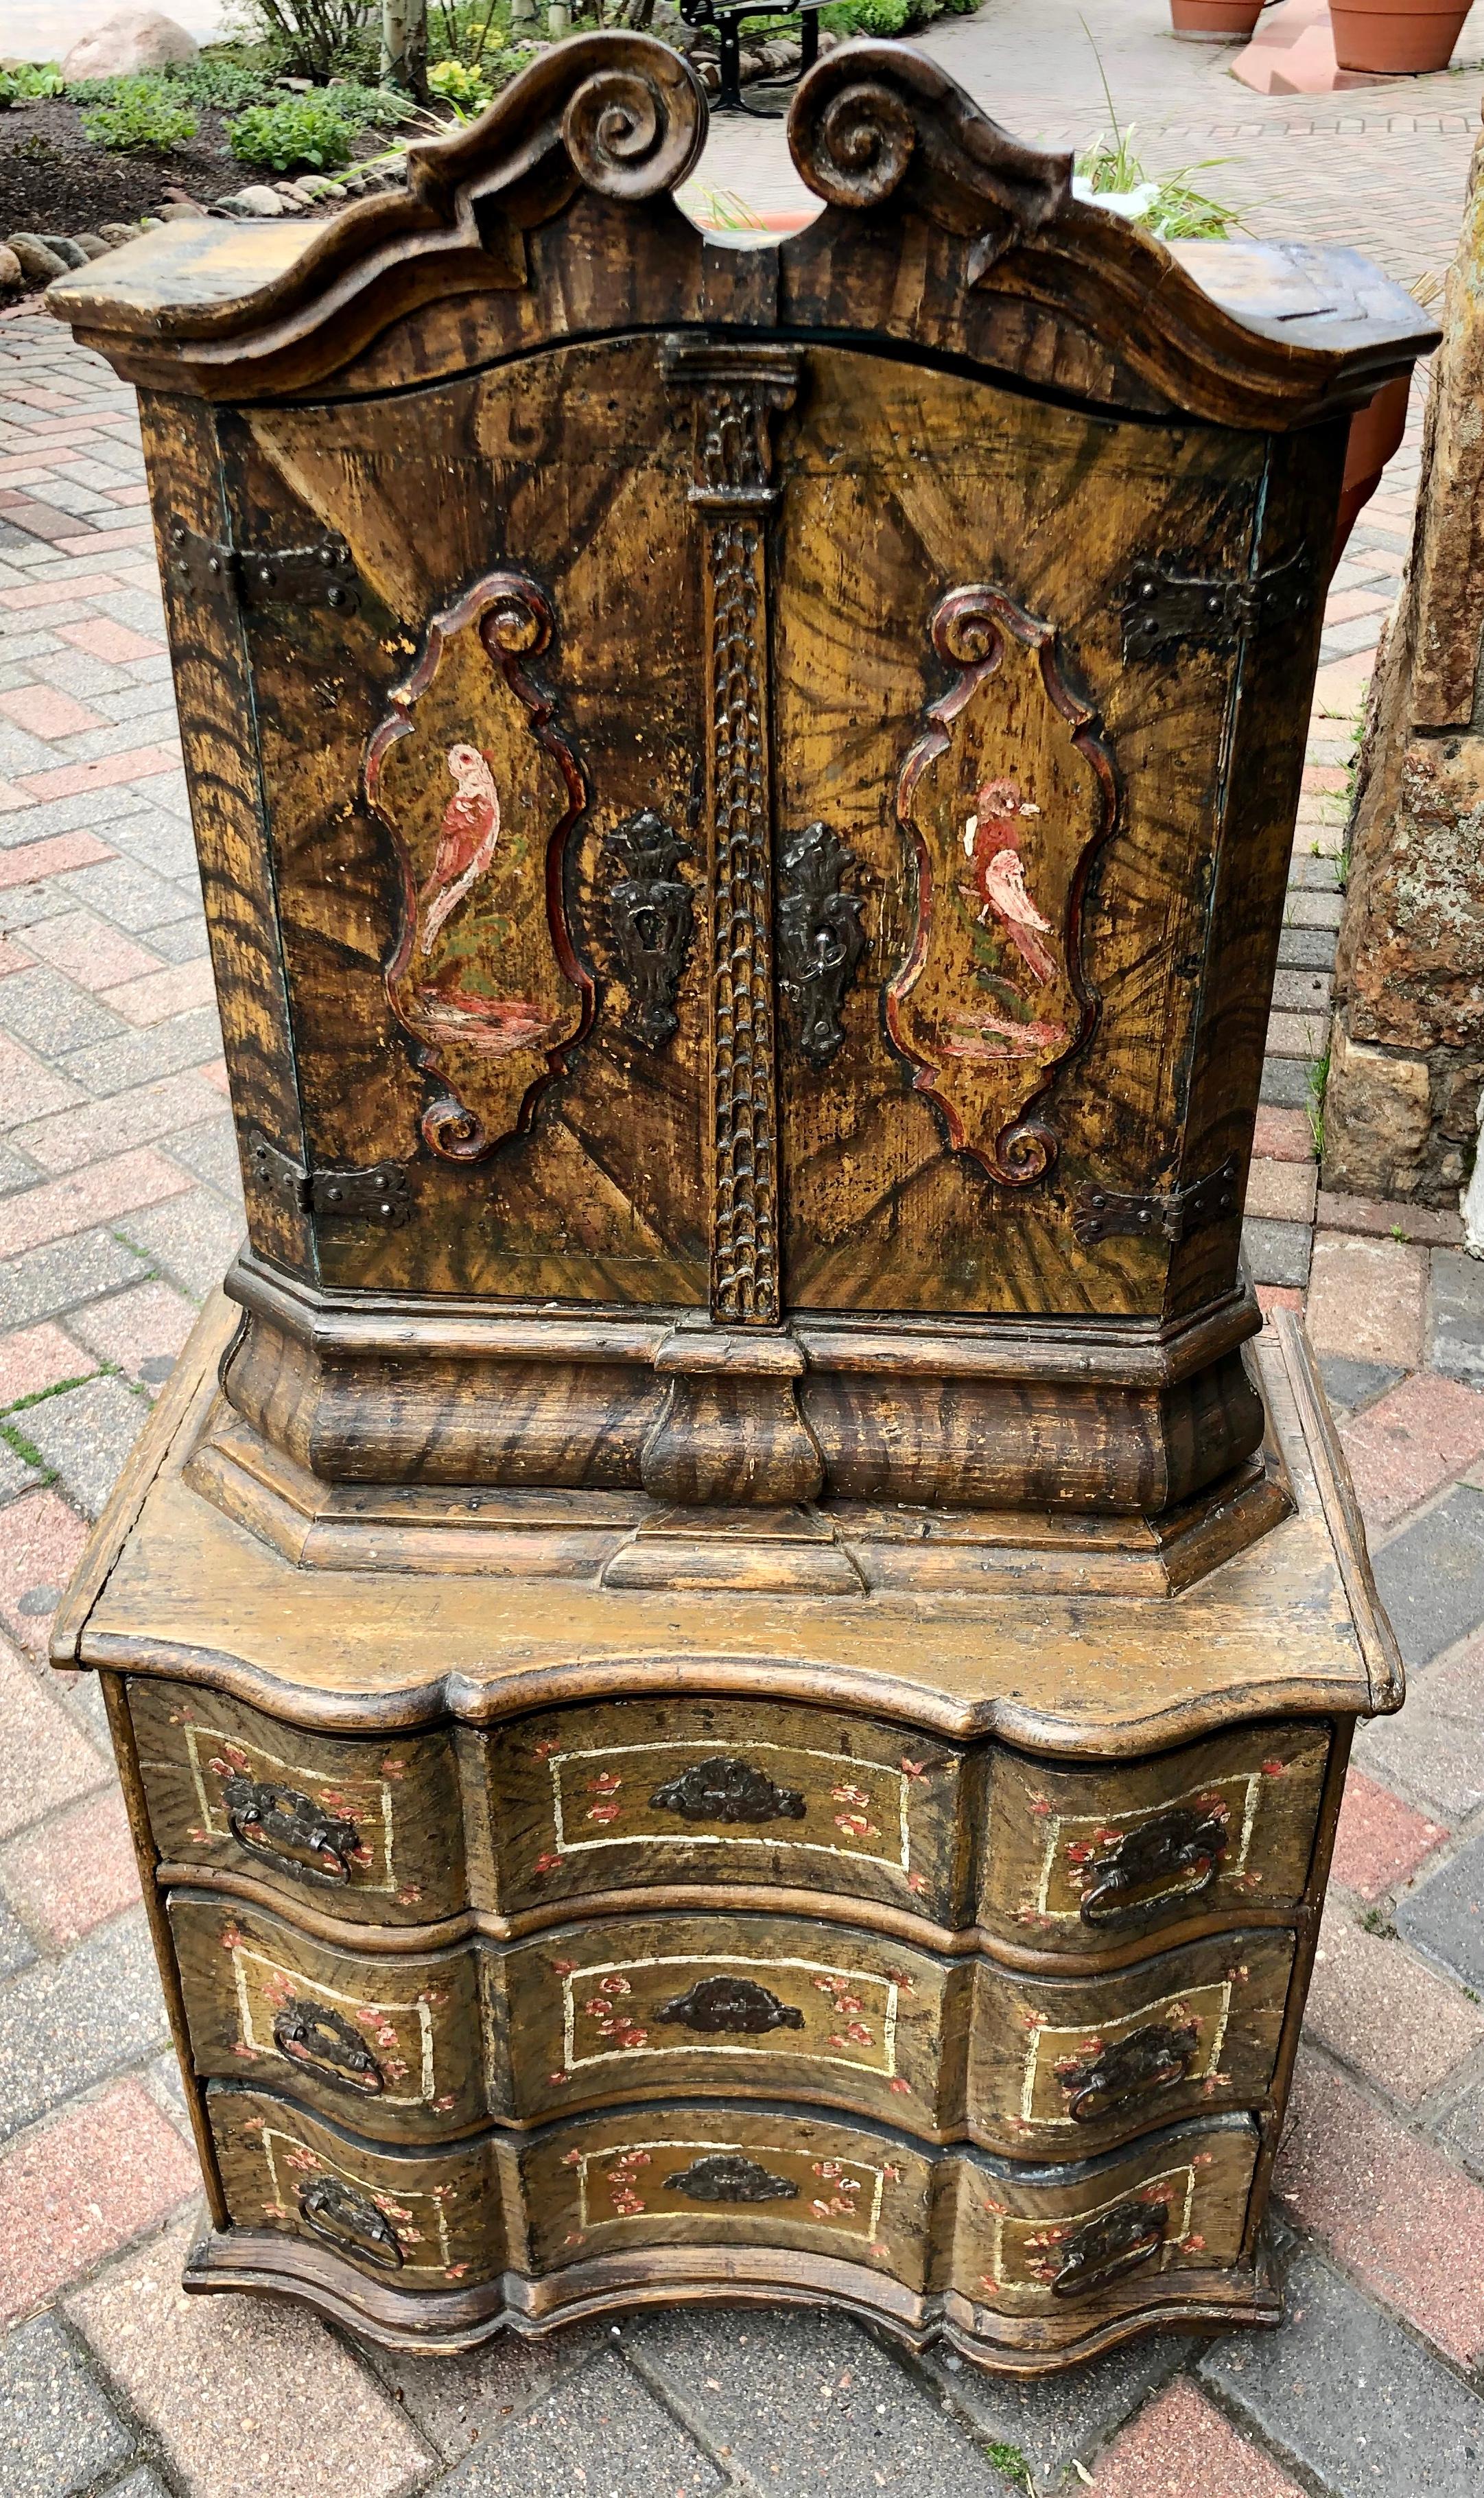 Most likely Austrian, locking top and all the drawers are functional. The piece is in overall very good condition given its age, excellent craftsmanship. This is very rare to find a painted piece or these proportions.